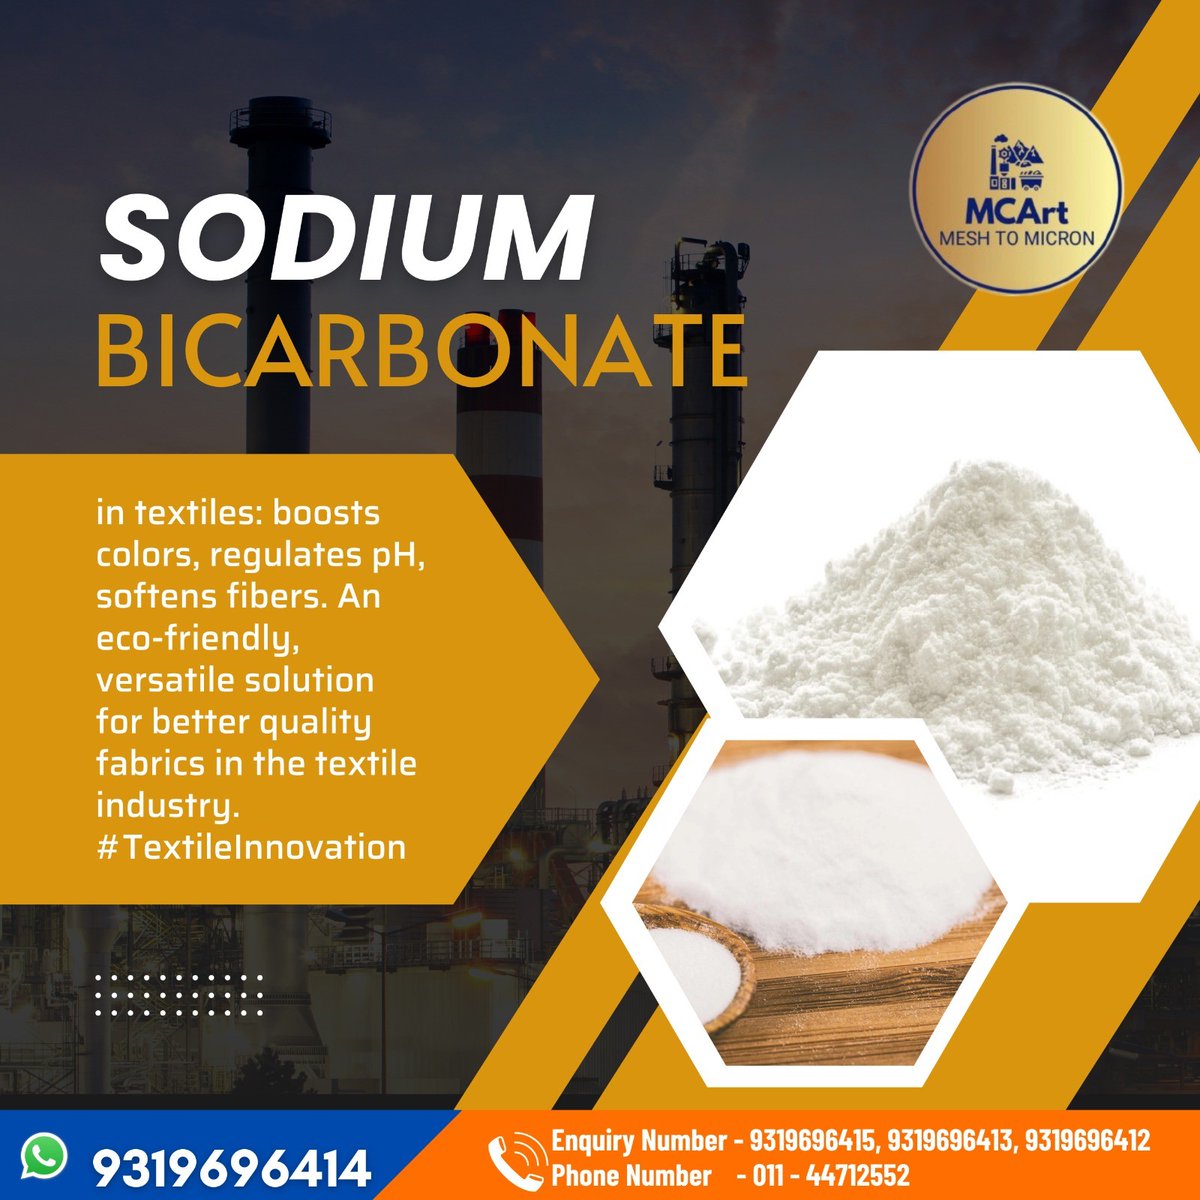 Elevate your textile game with the eco-friendly and versatile solution of sodium bicarbonate and kaoline! 
Whatsapp us at 093196 96414

#Mcart #Meshtomicron #Minerals #Chemicals #MineralResources #ChemicalIndustry  #SodiumBicarbonate #Kaoline #FabricEnhancement